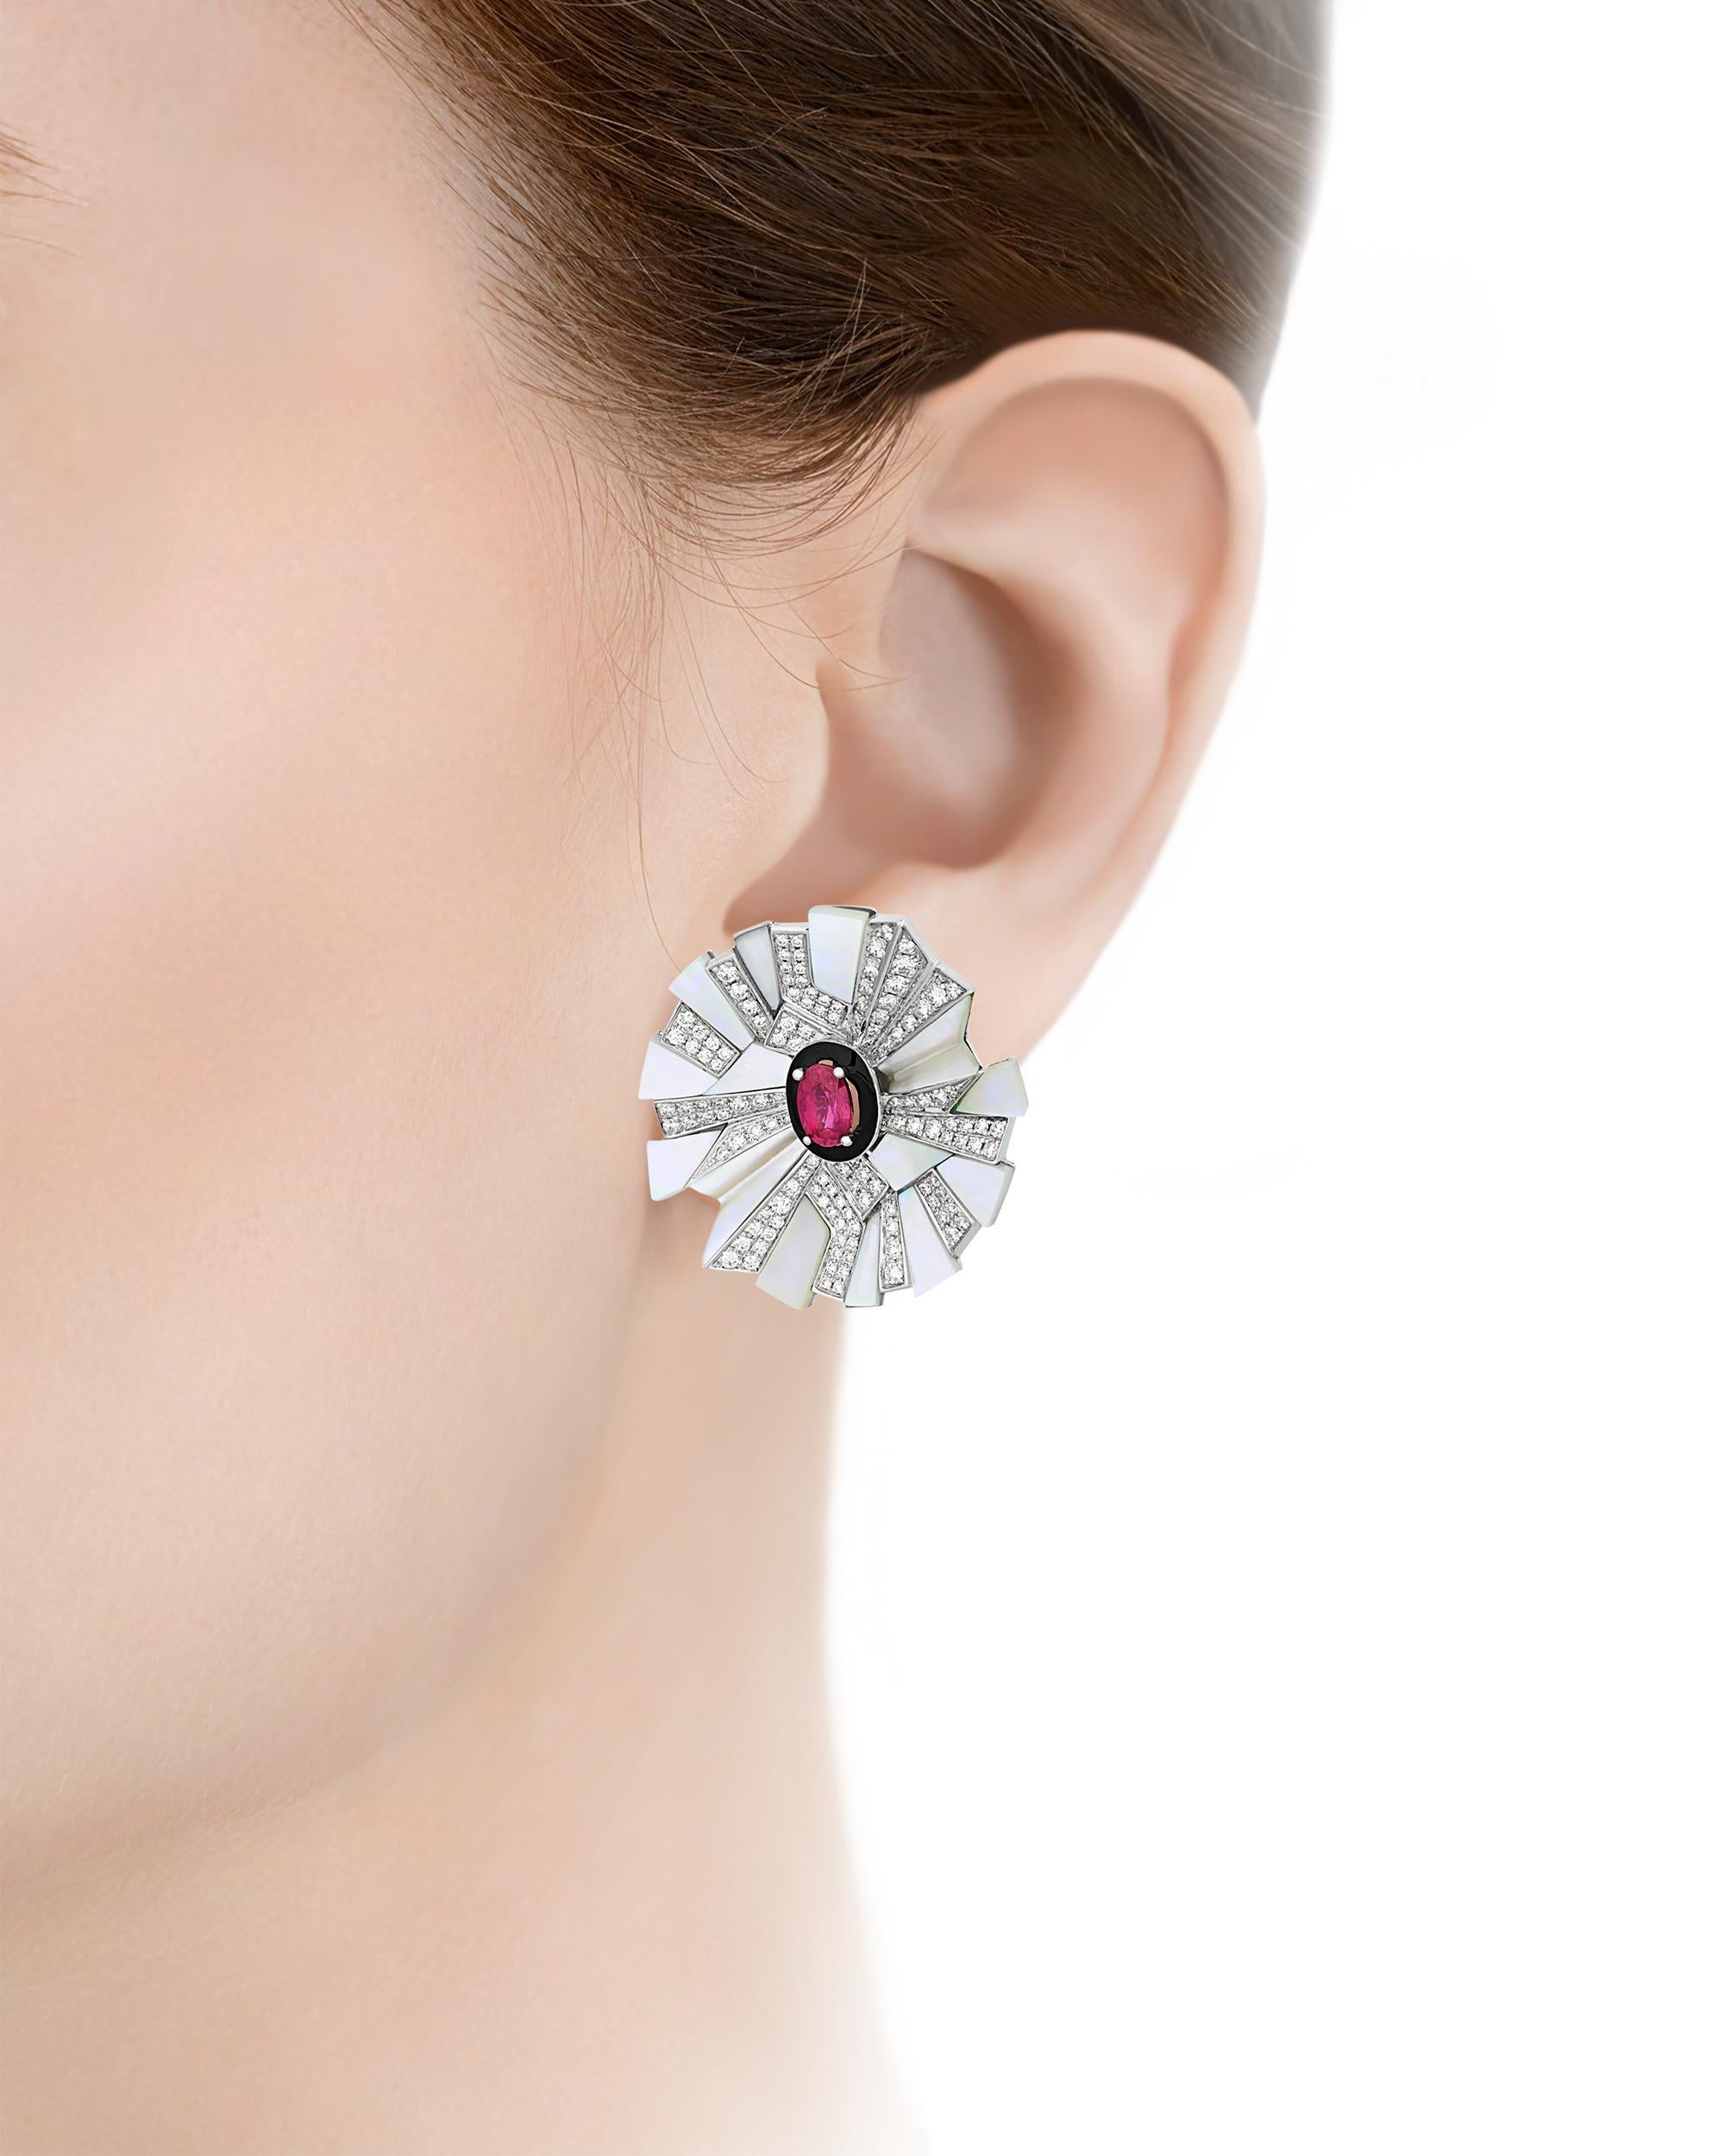 The exquisite rubies at the heart of these captivating earrings hail from Mozambique and total 1.12 carats. Rubies from this region are highly sought after for their brilliant red hue and high transparency. These incredible stones are surrounded by